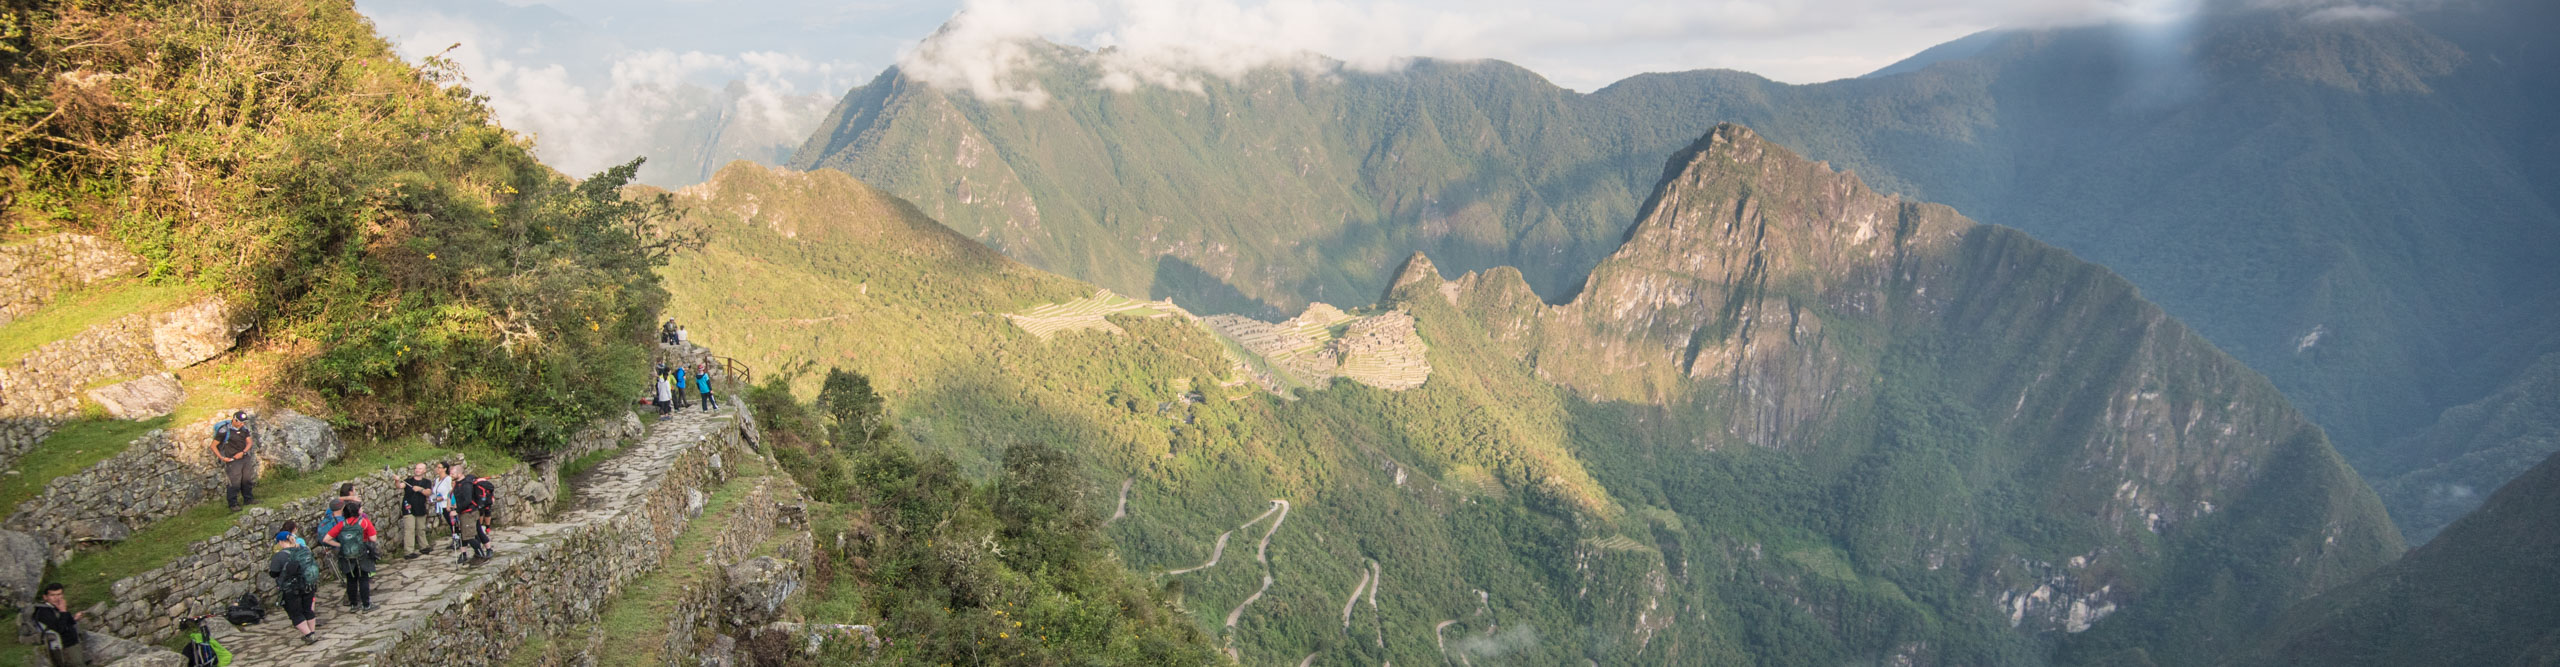 Aerial view of the trail leading to Machu Picchu, with clouds not top of the mountains, Peru